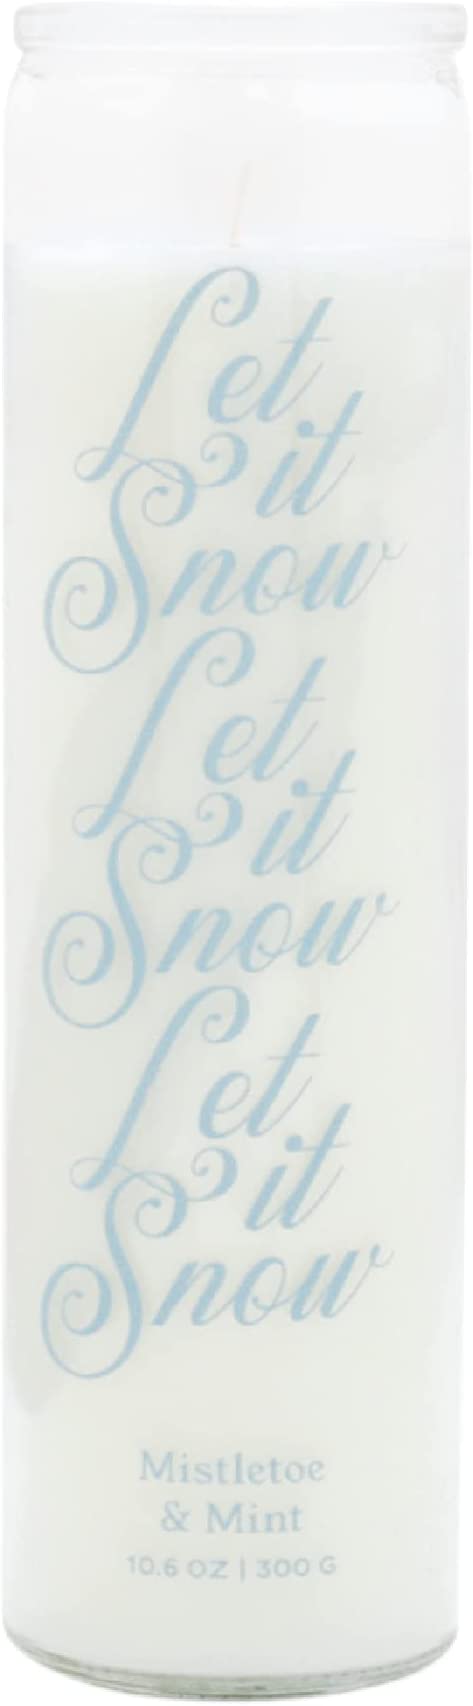 Let It Snow Holiday Spark